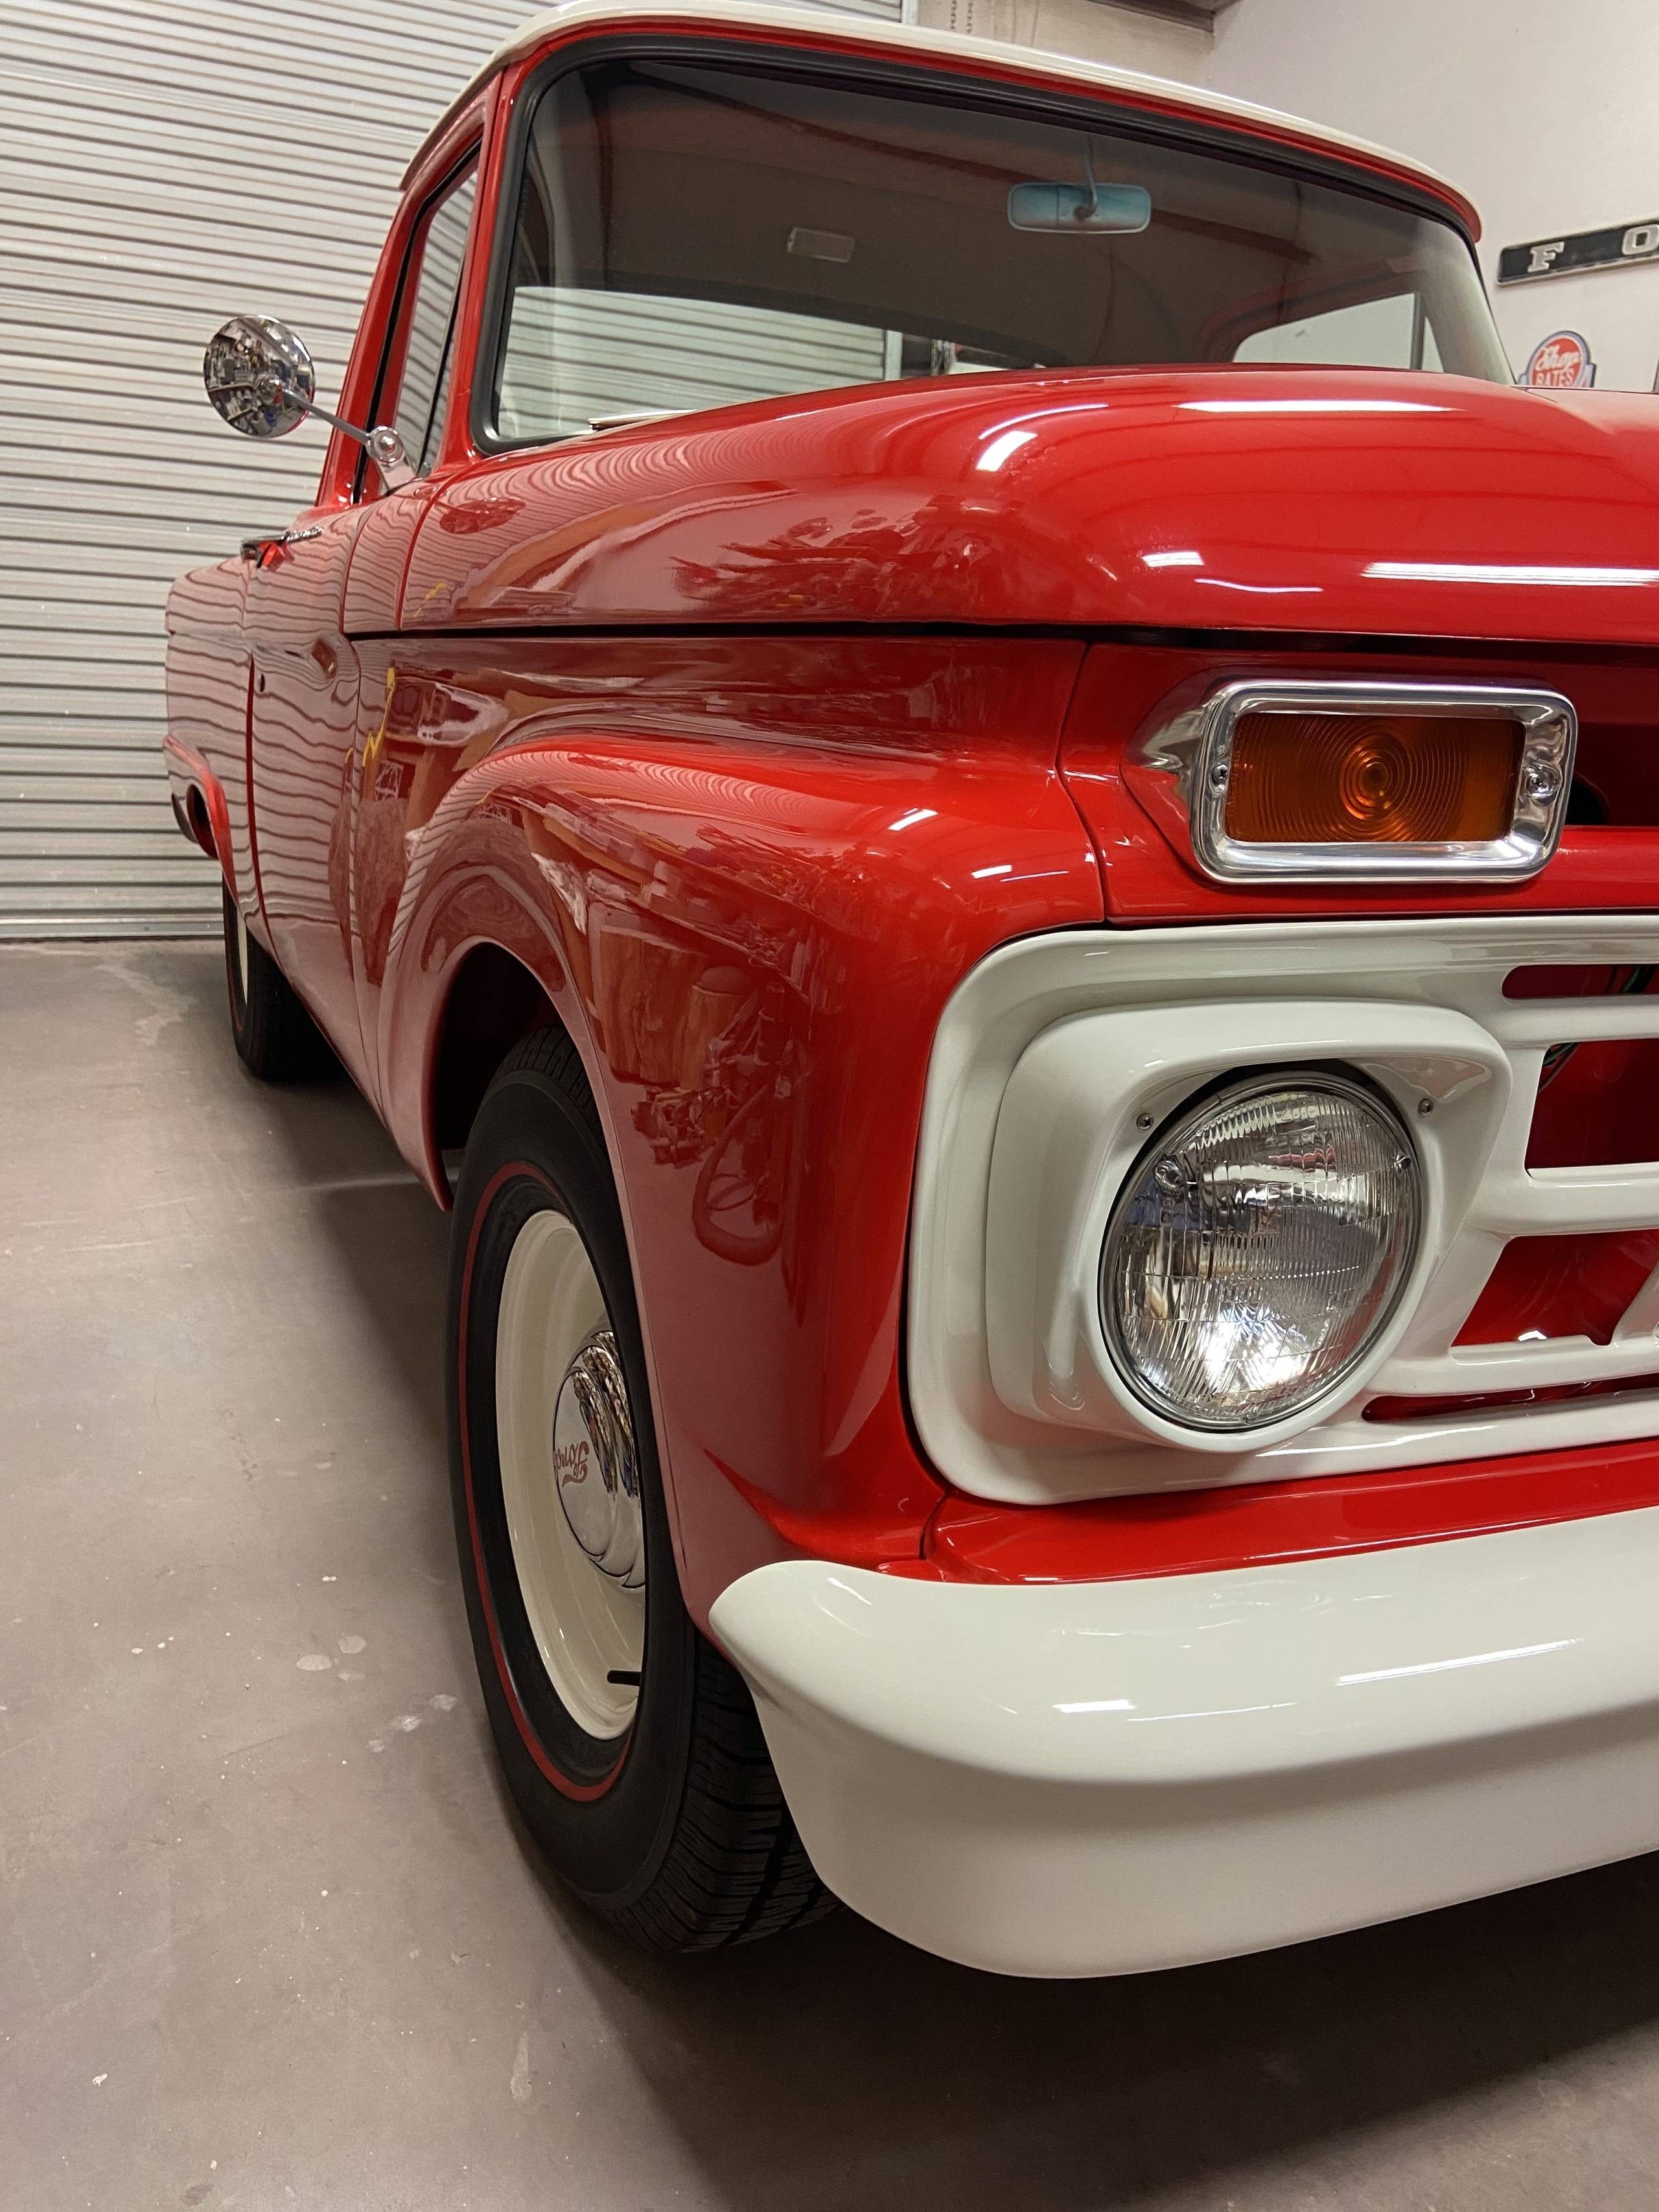 1965 Ford F100 2